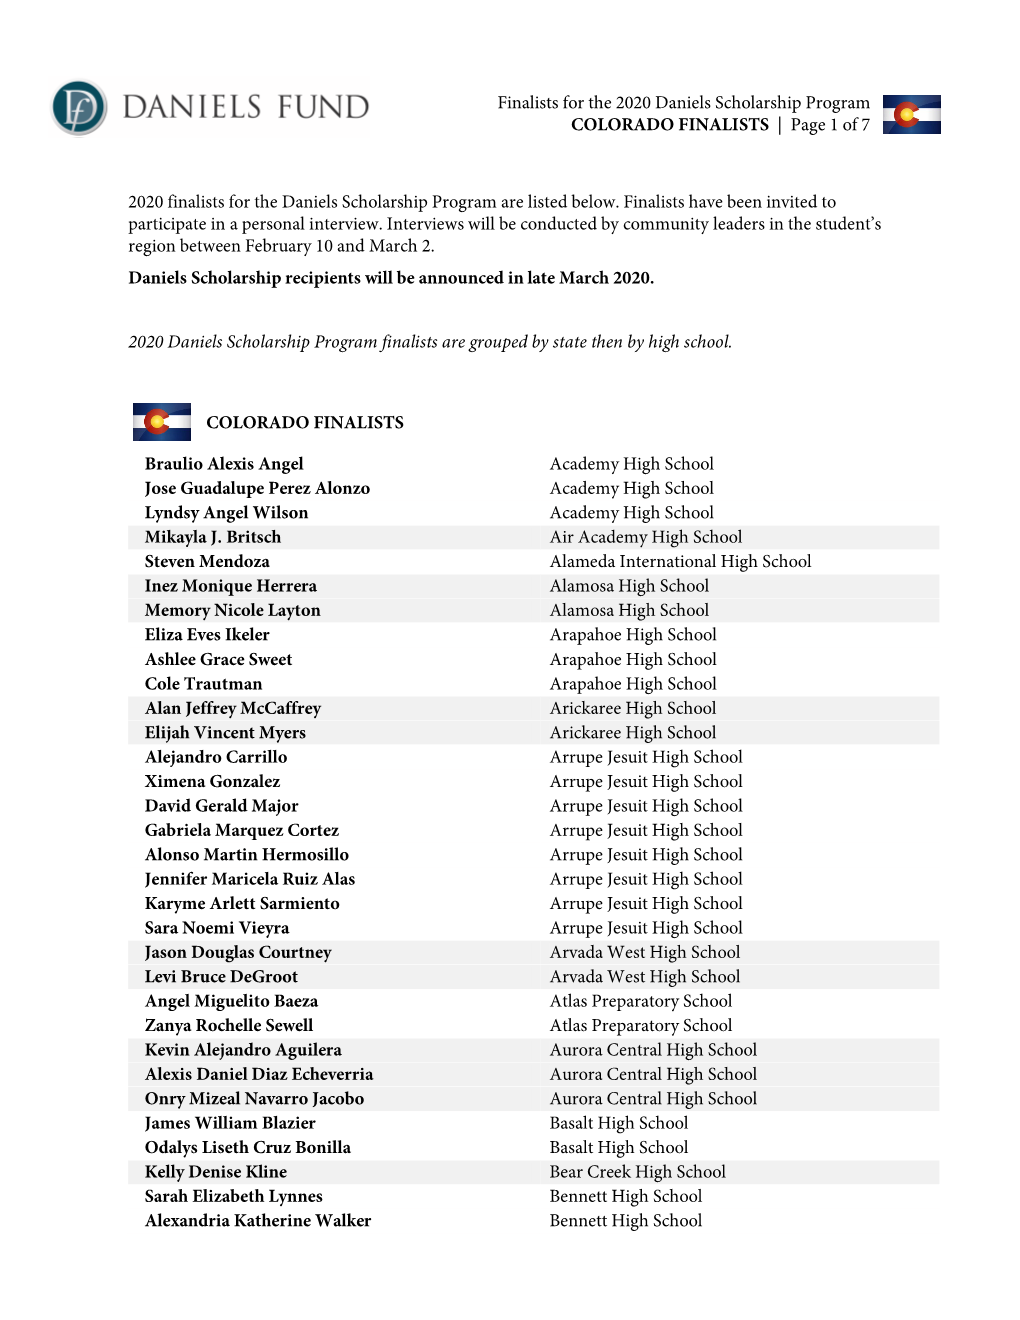 Finalists for the 2020 Daniels Scholarship Program COLORADO FINALISTS | Page 1 of 7